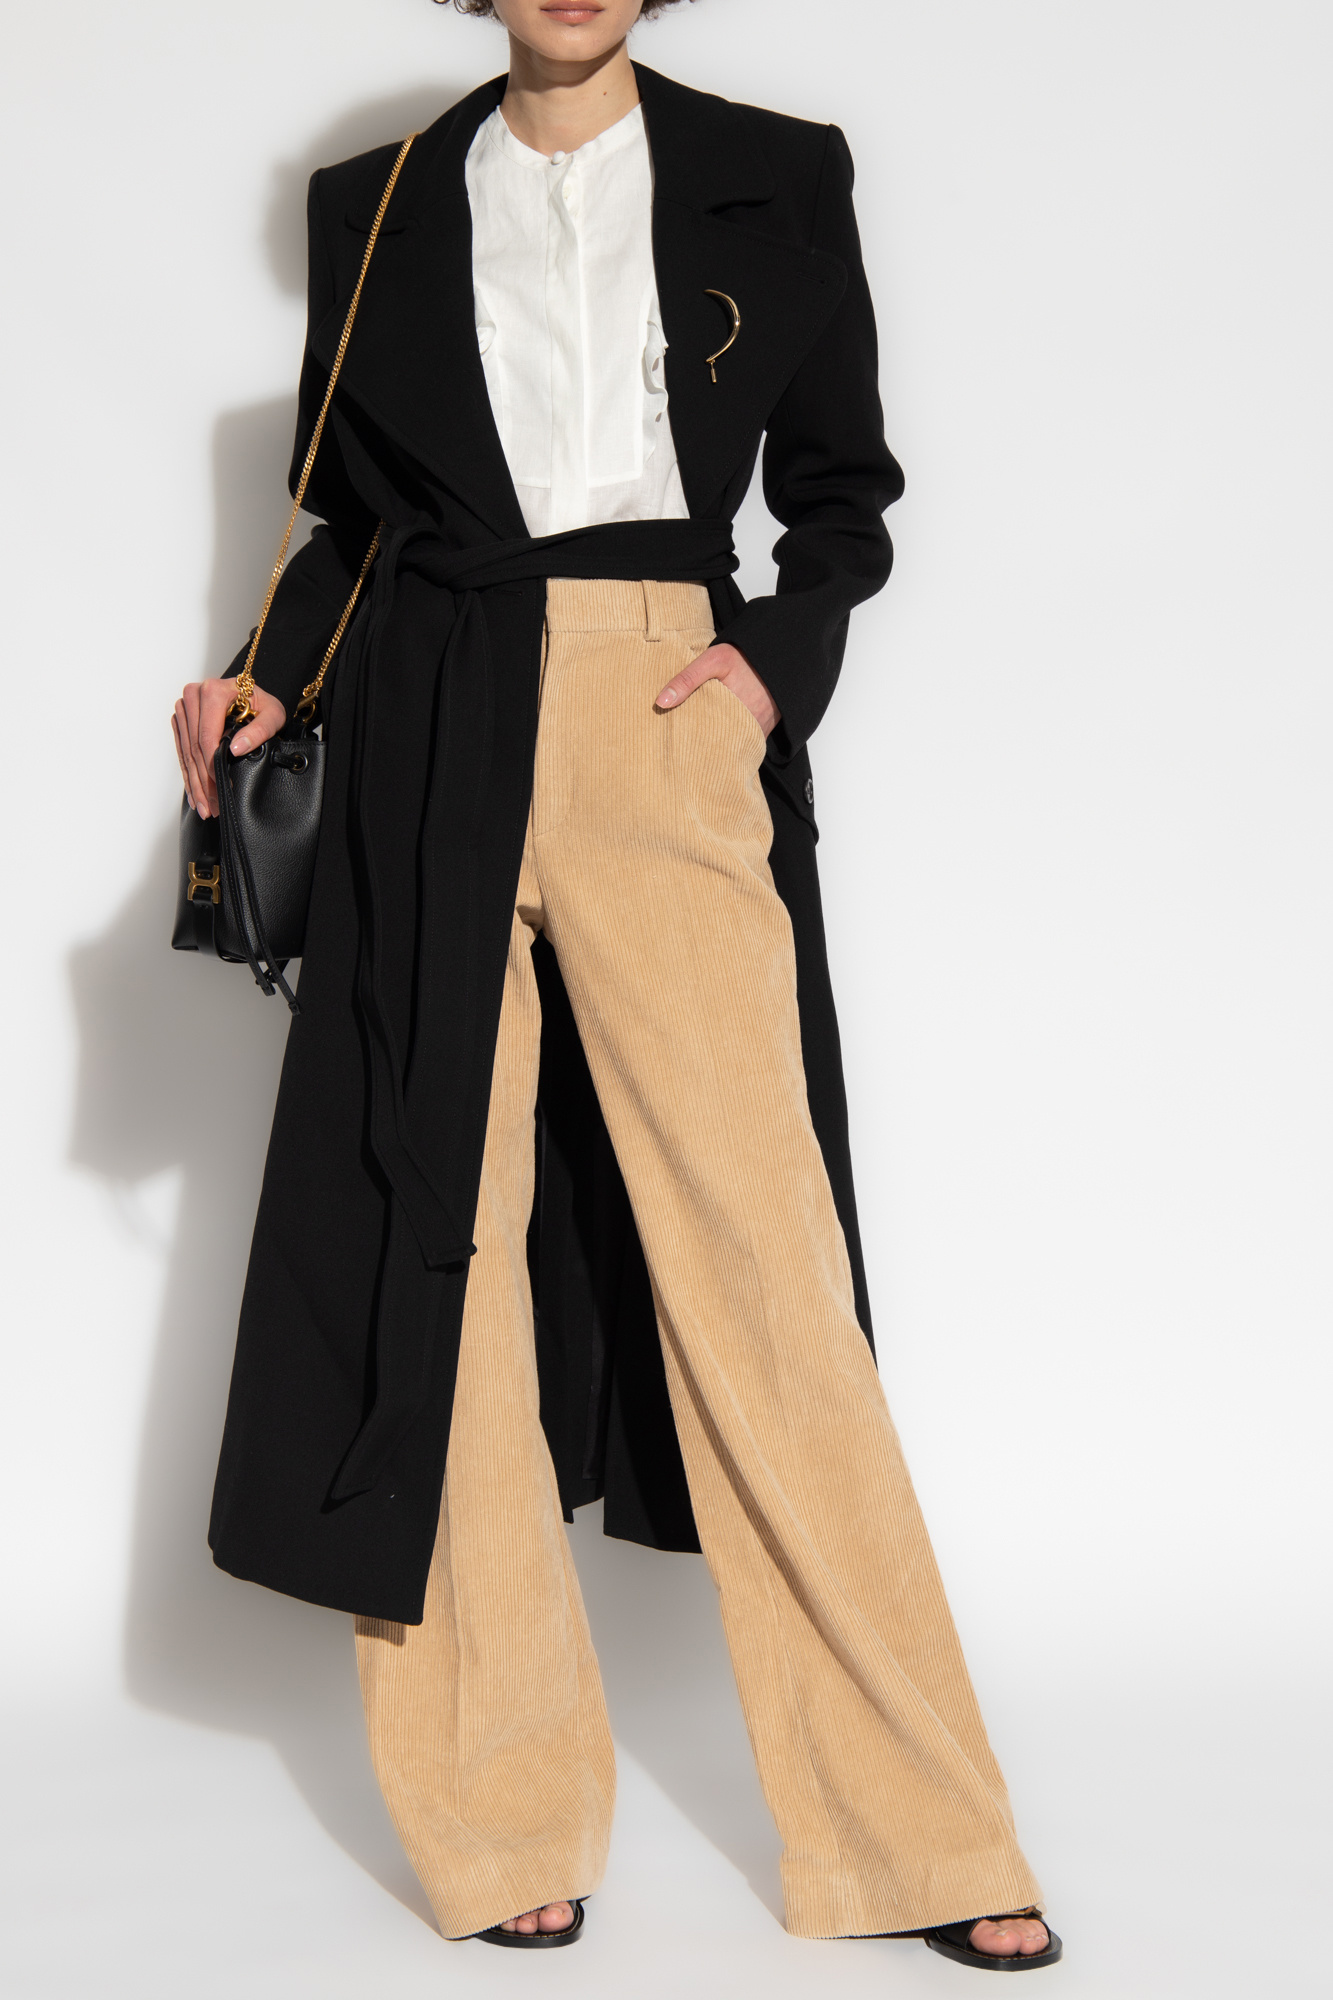 Buy Corduroy Tapered Ankle Grazer Trousers Online at Best Prices